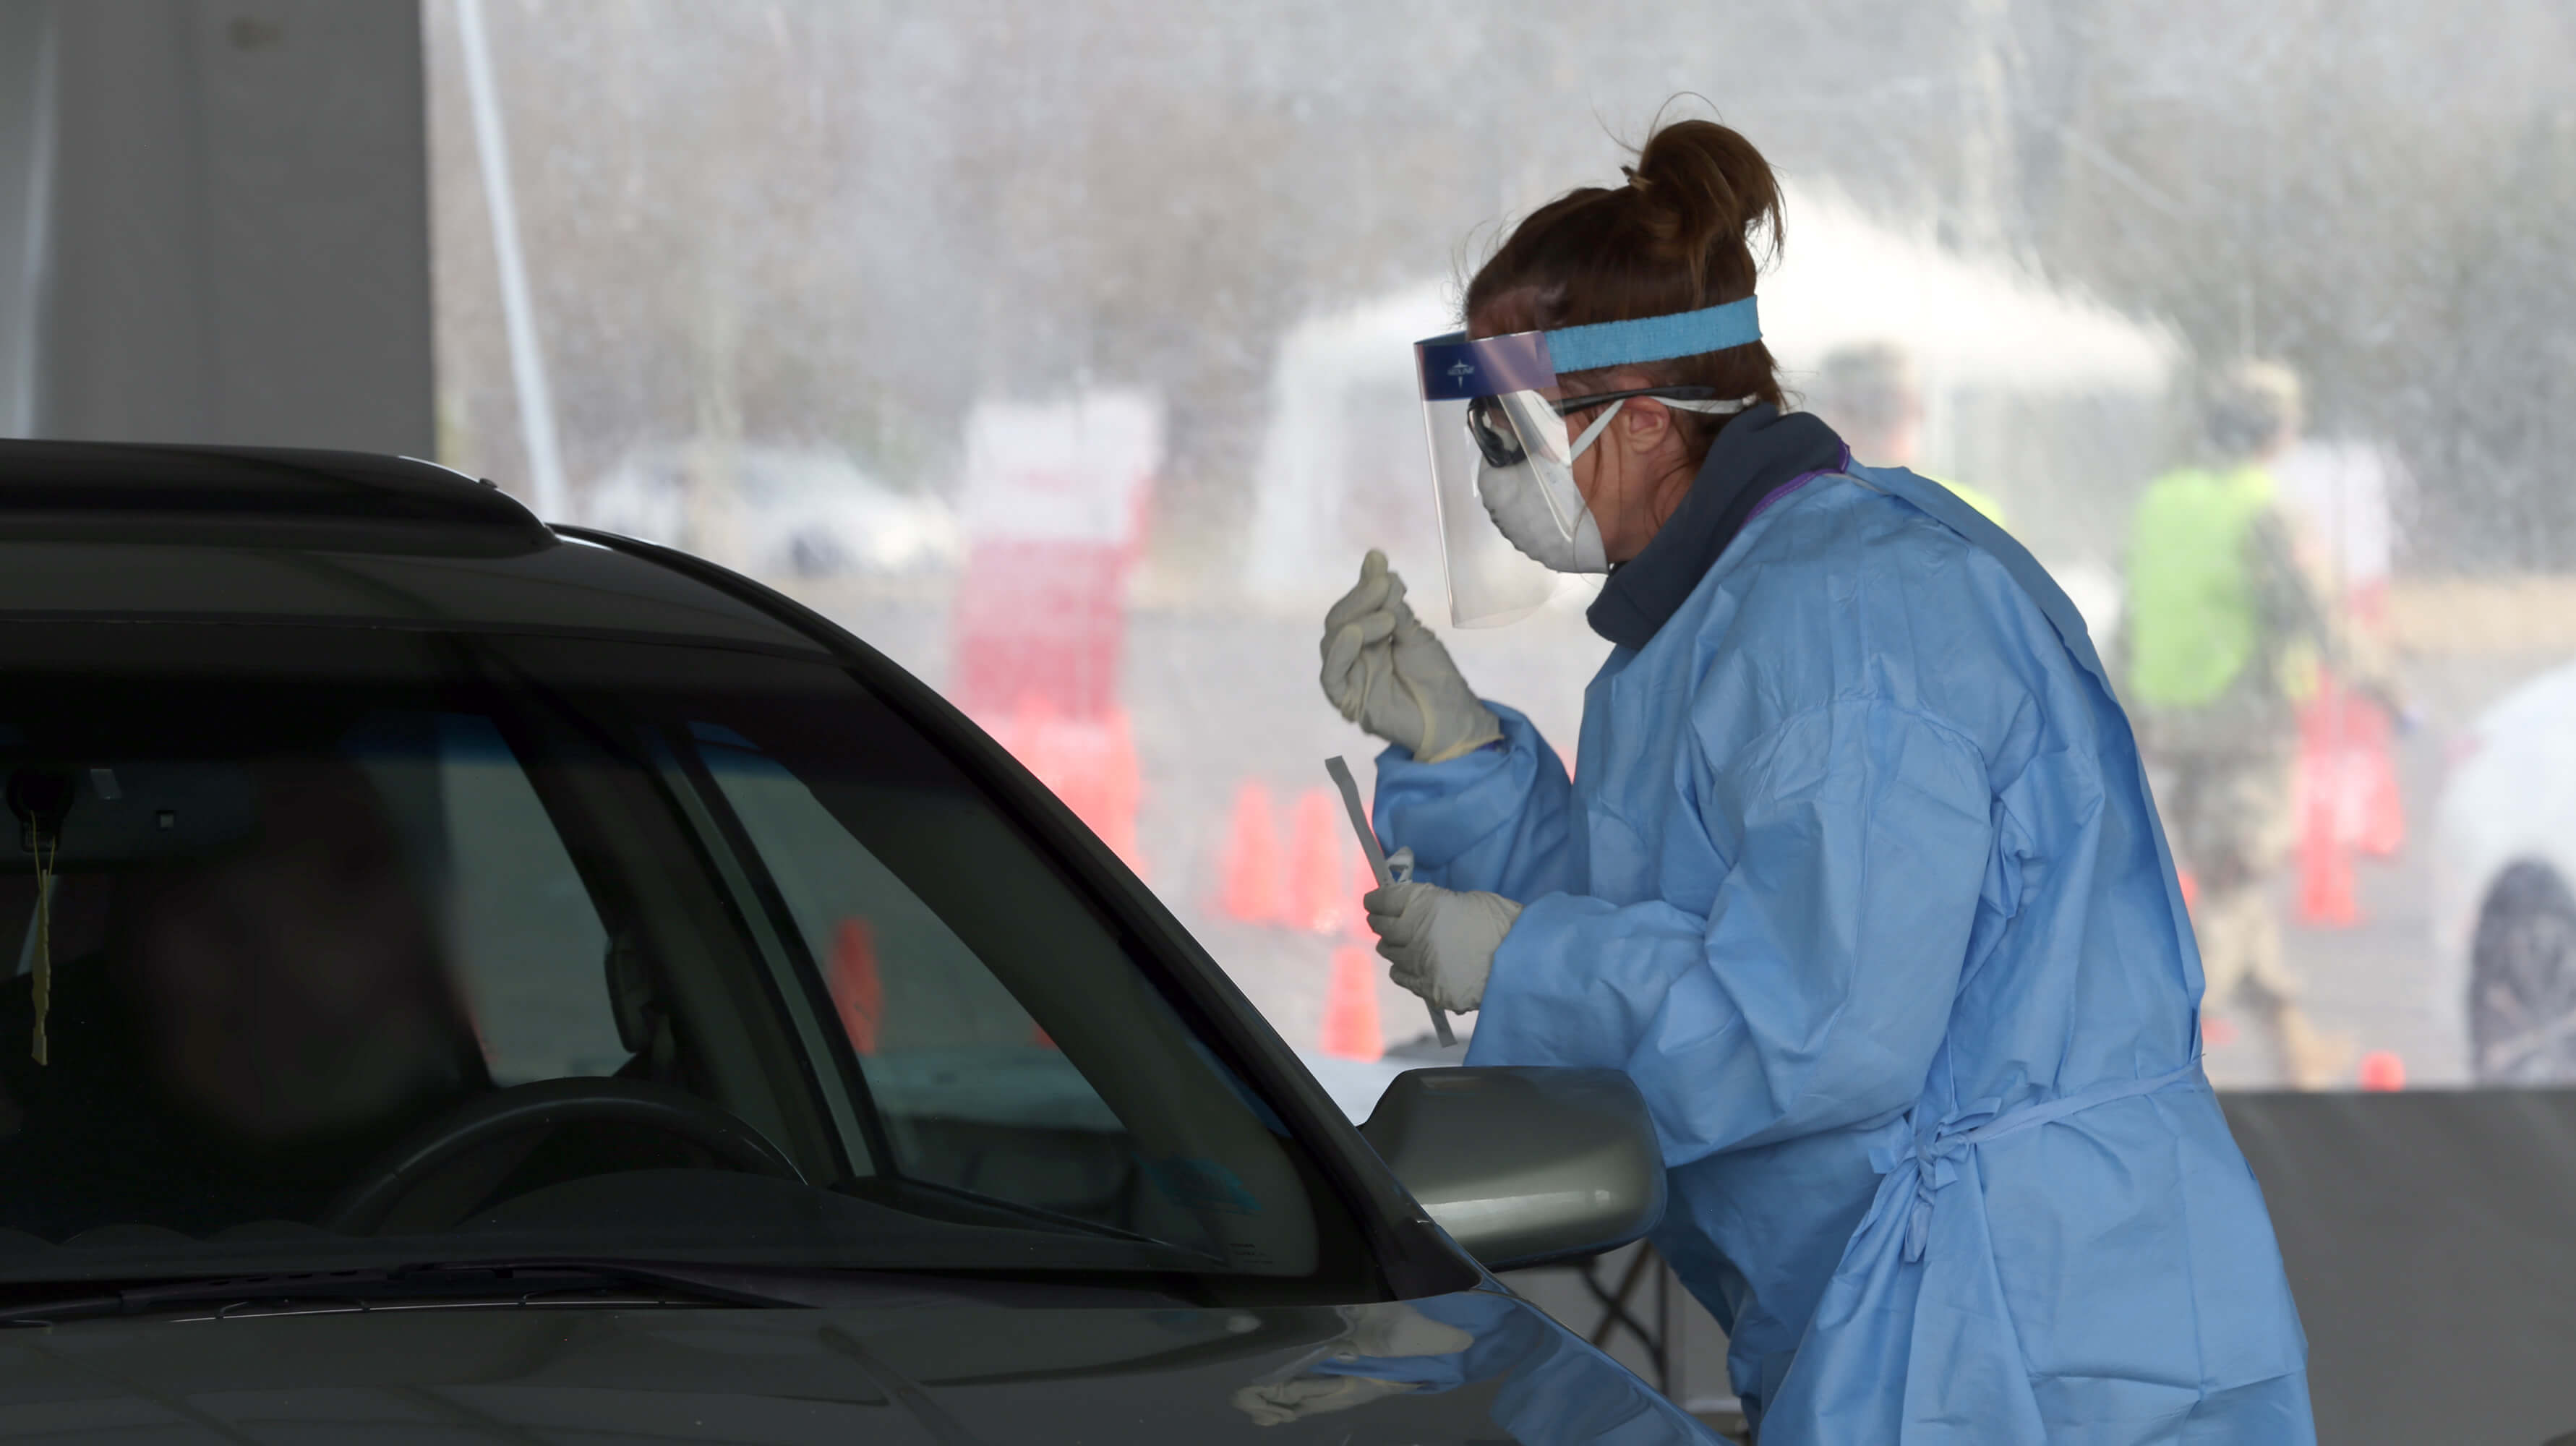 A medical professional examines a swab taken from a patient at a COVID-19 rapid testing drive-through site.